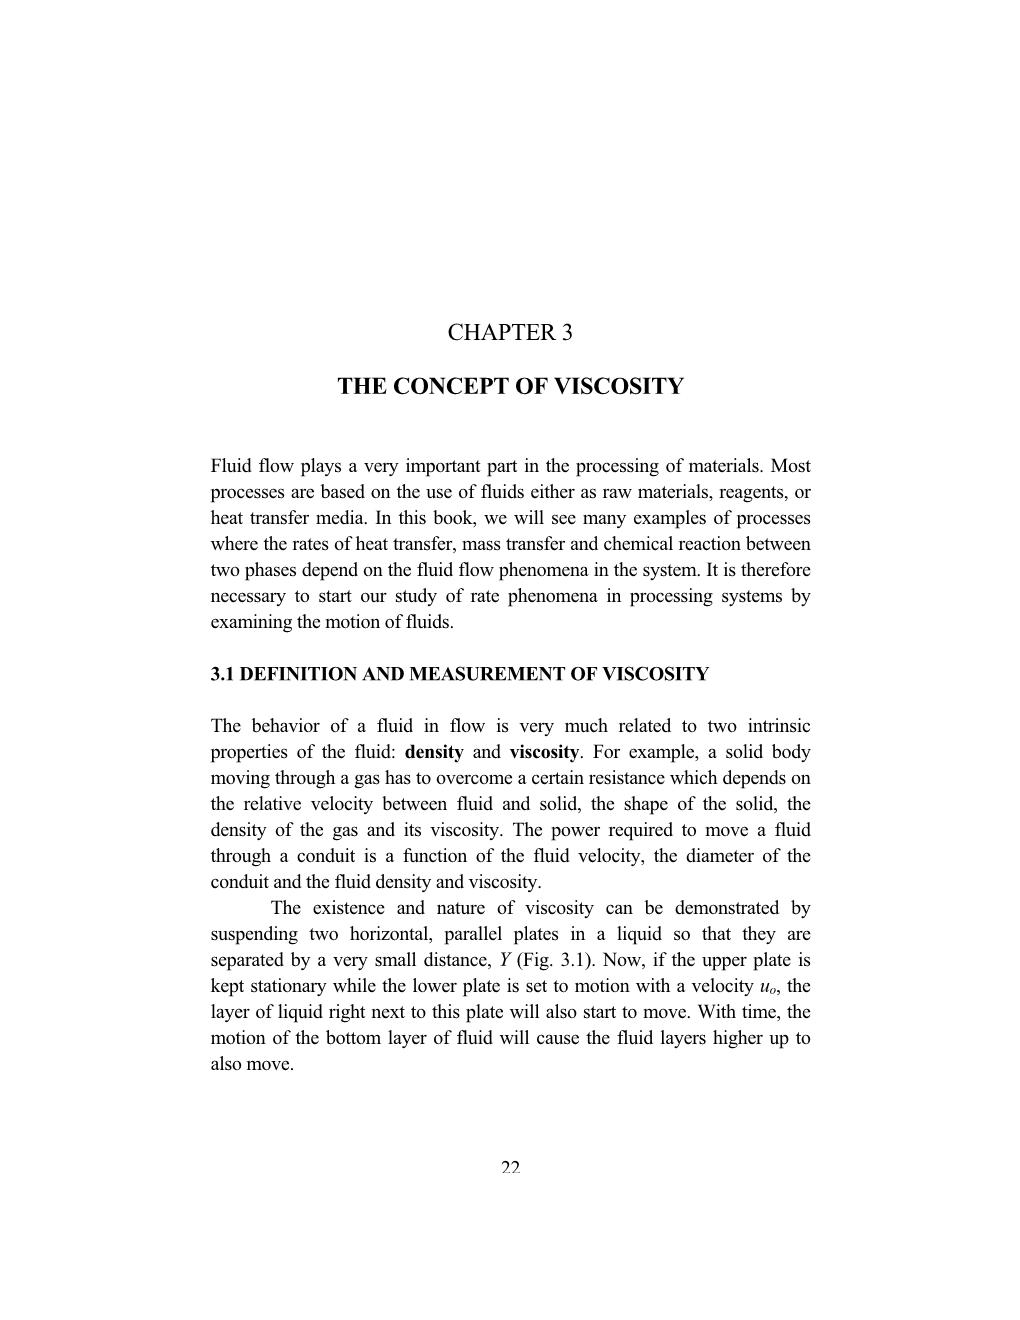 Chapter 3 the Concept of Viscosity